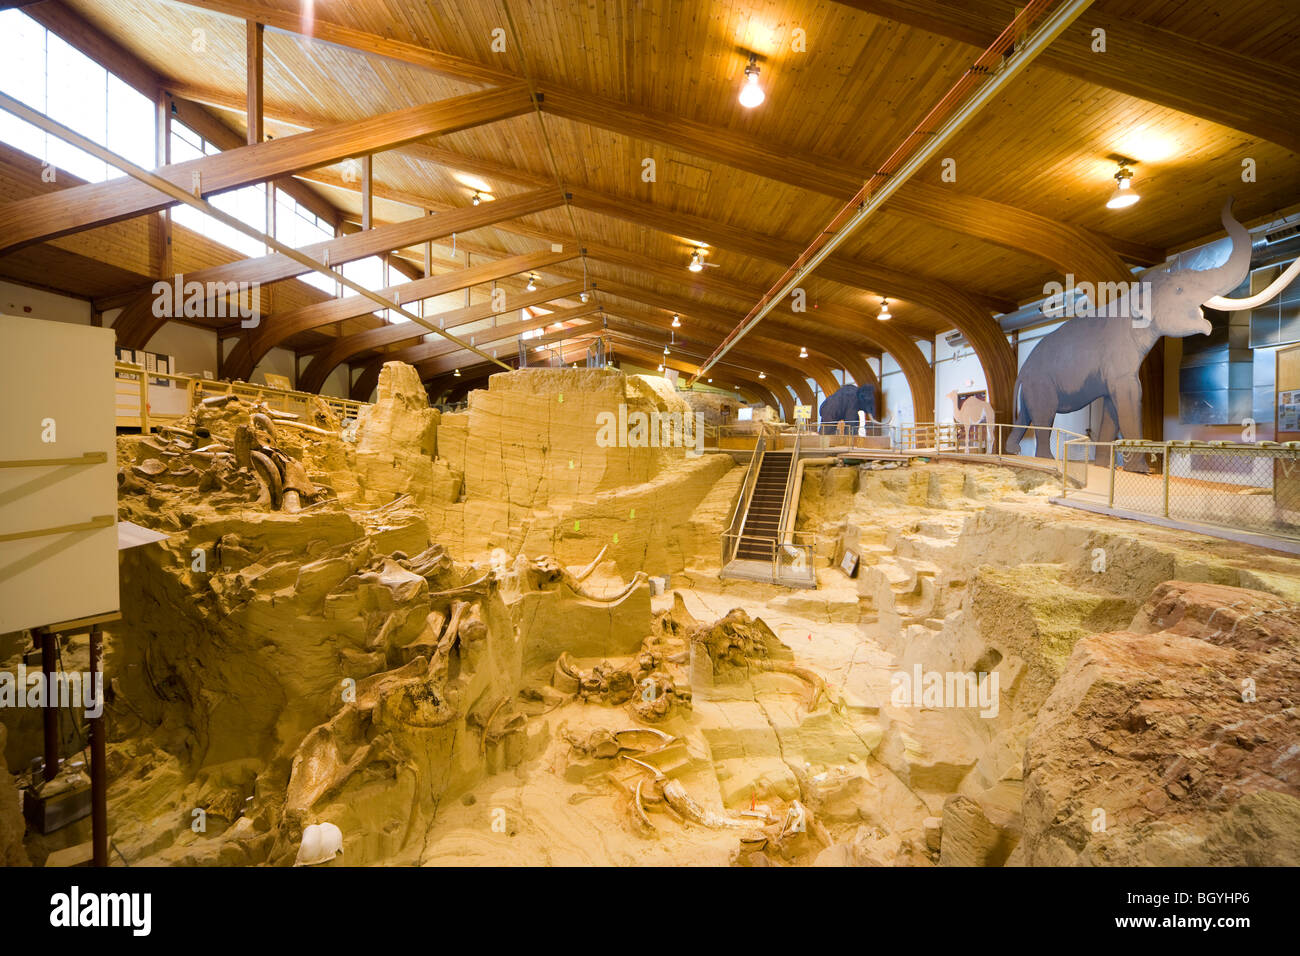 The Mammoth Site Museum, Hot Springs SD. Interior view of the bonebed with mammoth bones tusks fossils in paleontology dig. Stock Photo